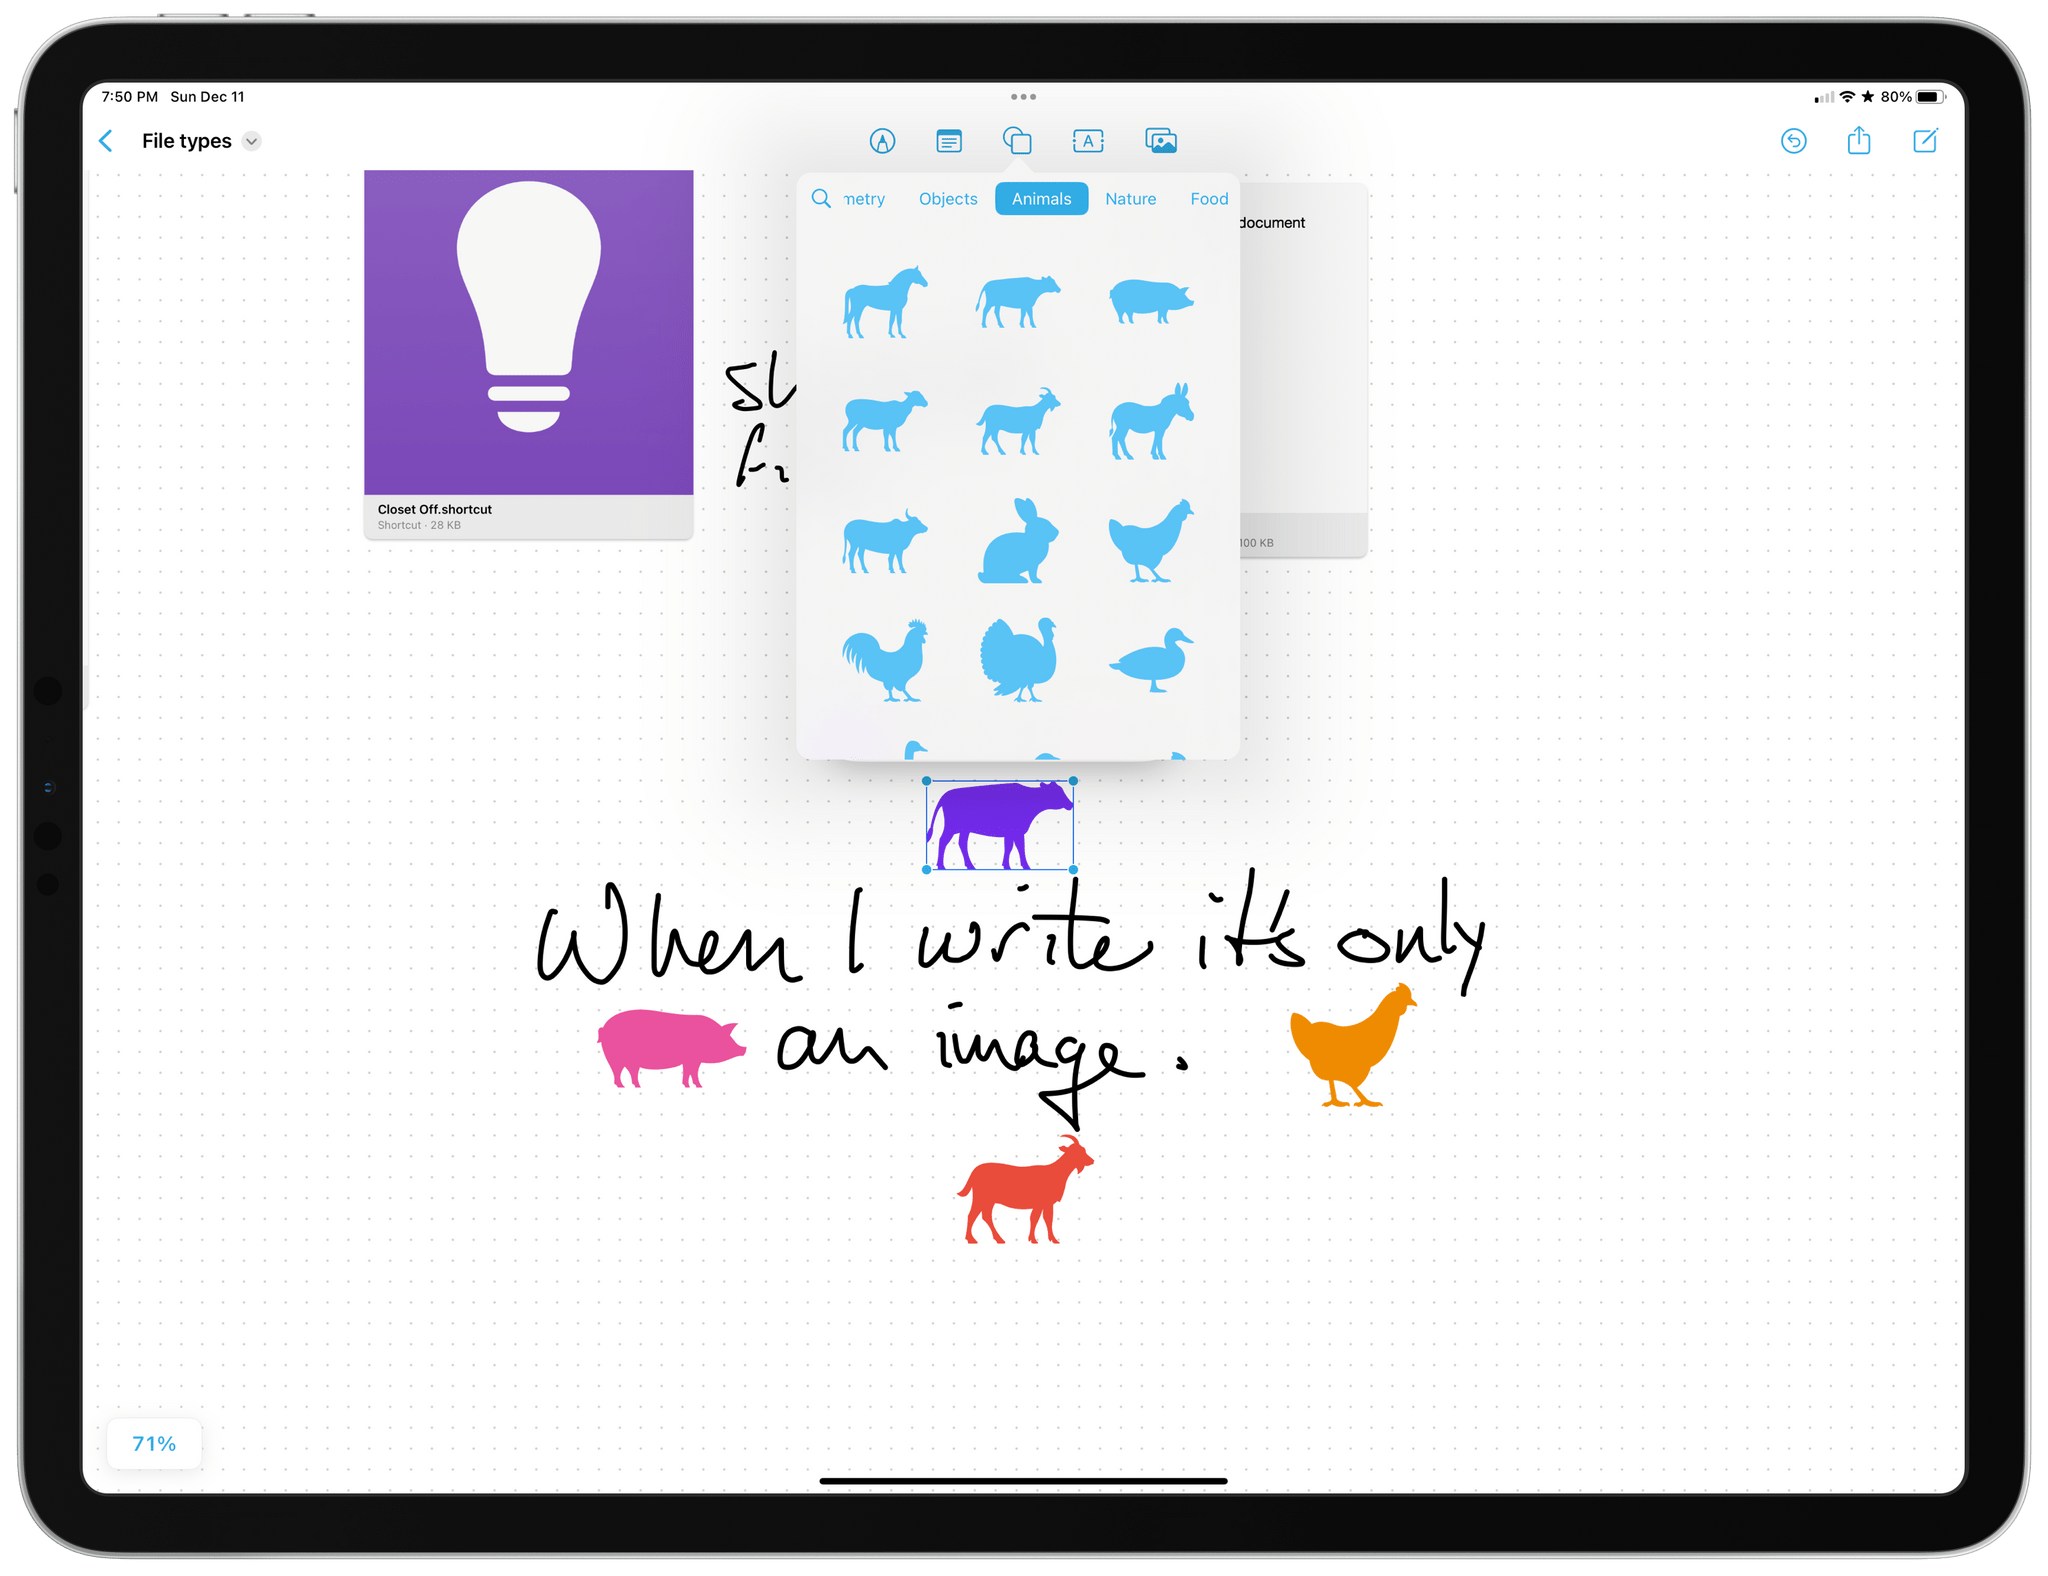 Freeform lets you decorate your boards with colorful farm animals if you'd like.